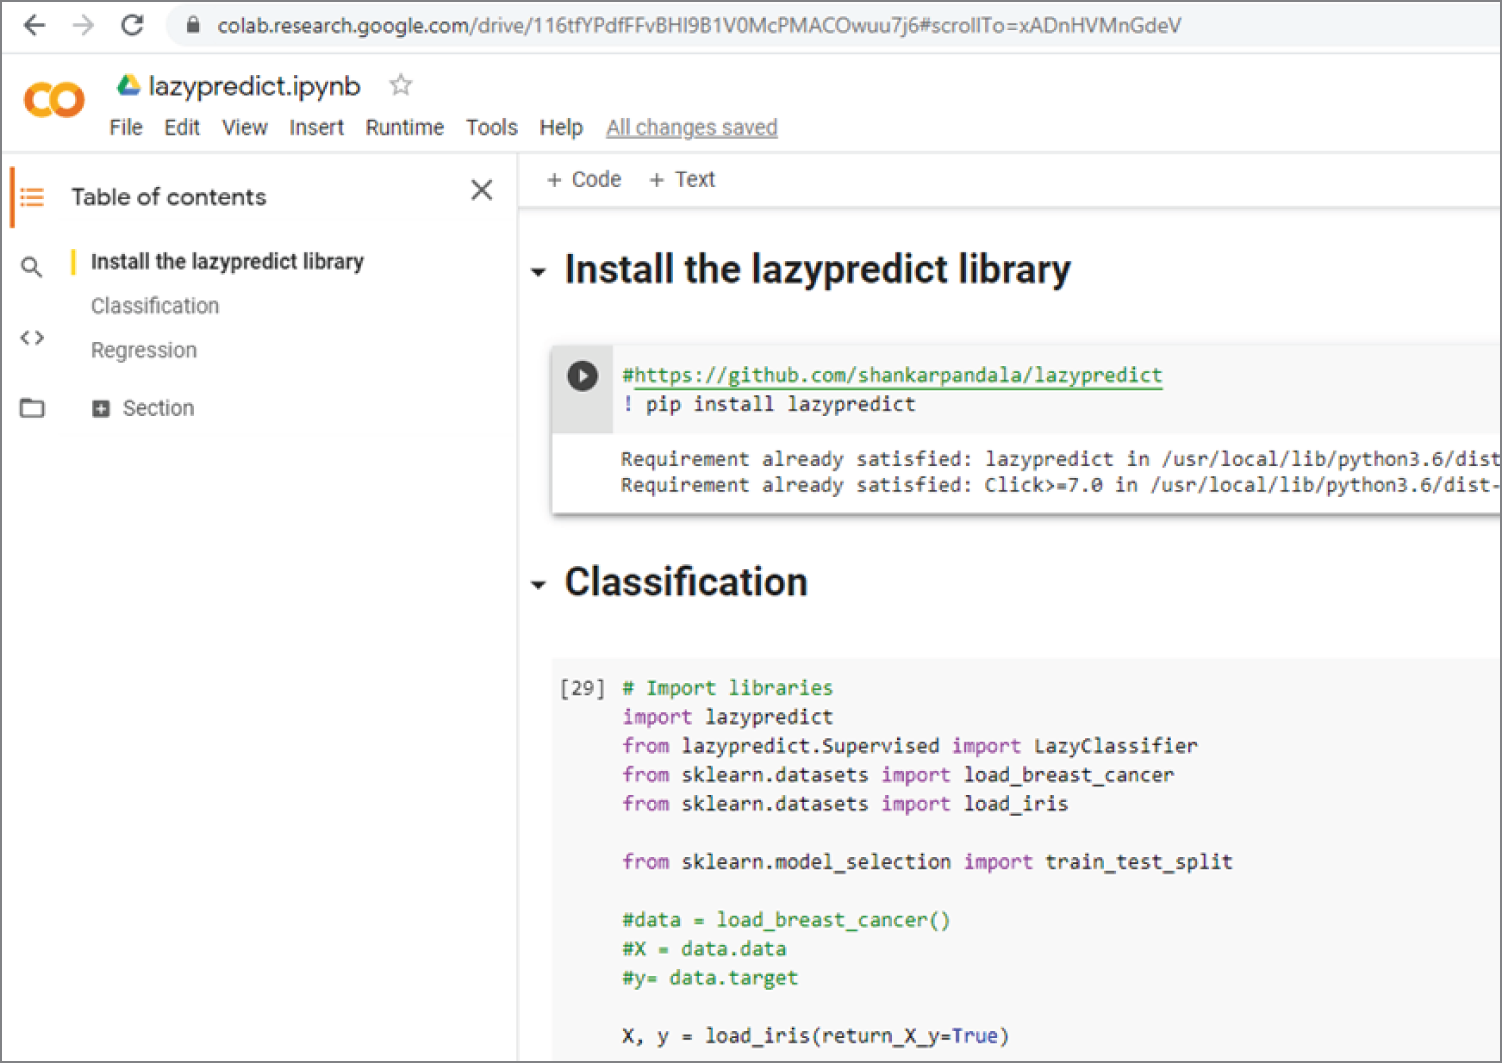 Snapshot of the Google Colab code of the first two sections of the program